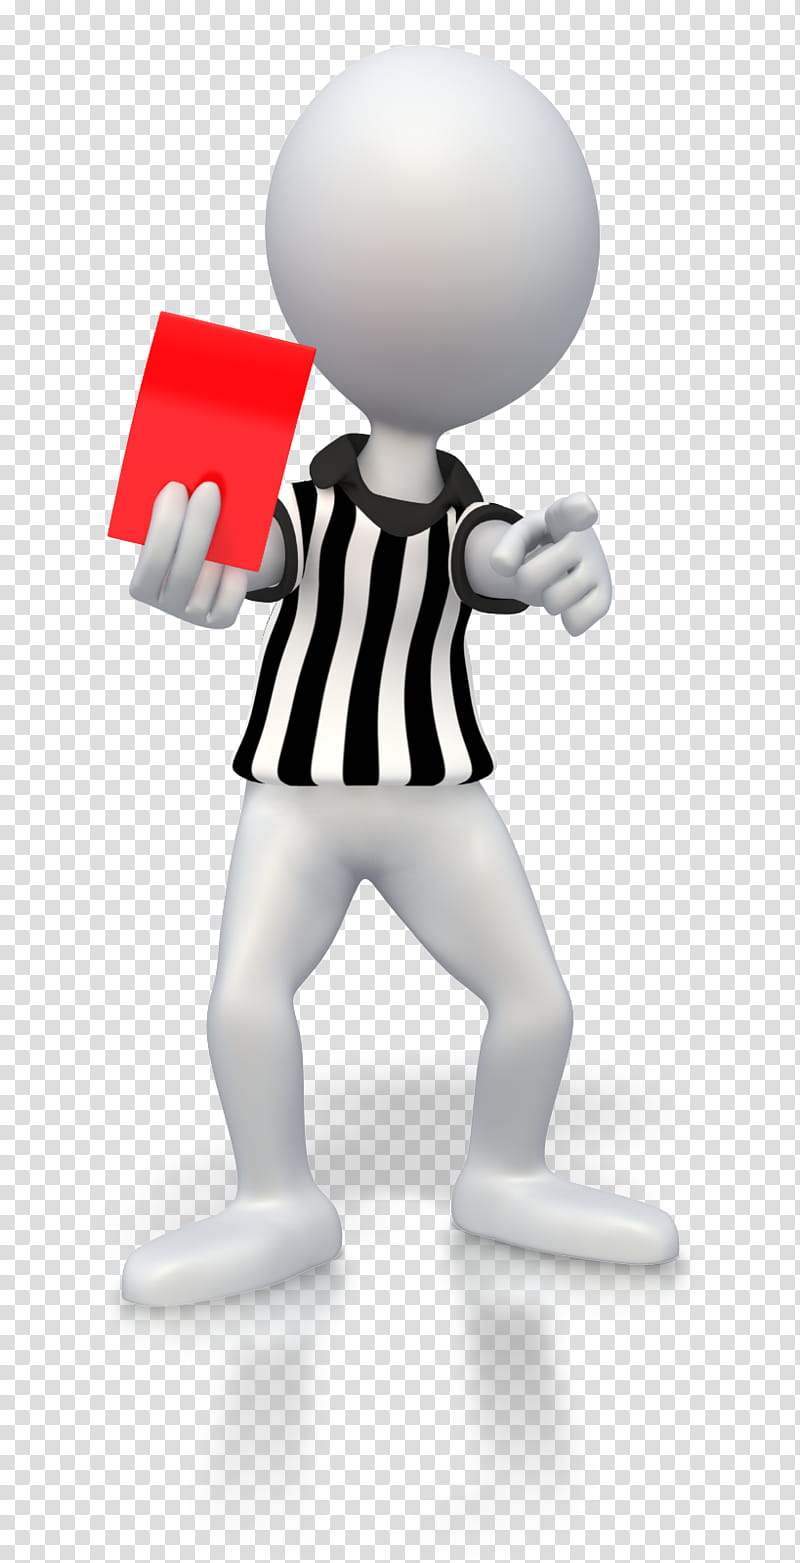 Football, Referee, Association Football Referee, Whistle, Cartoon, Penalty Card, Job, Gesture transparent background PNG clipart